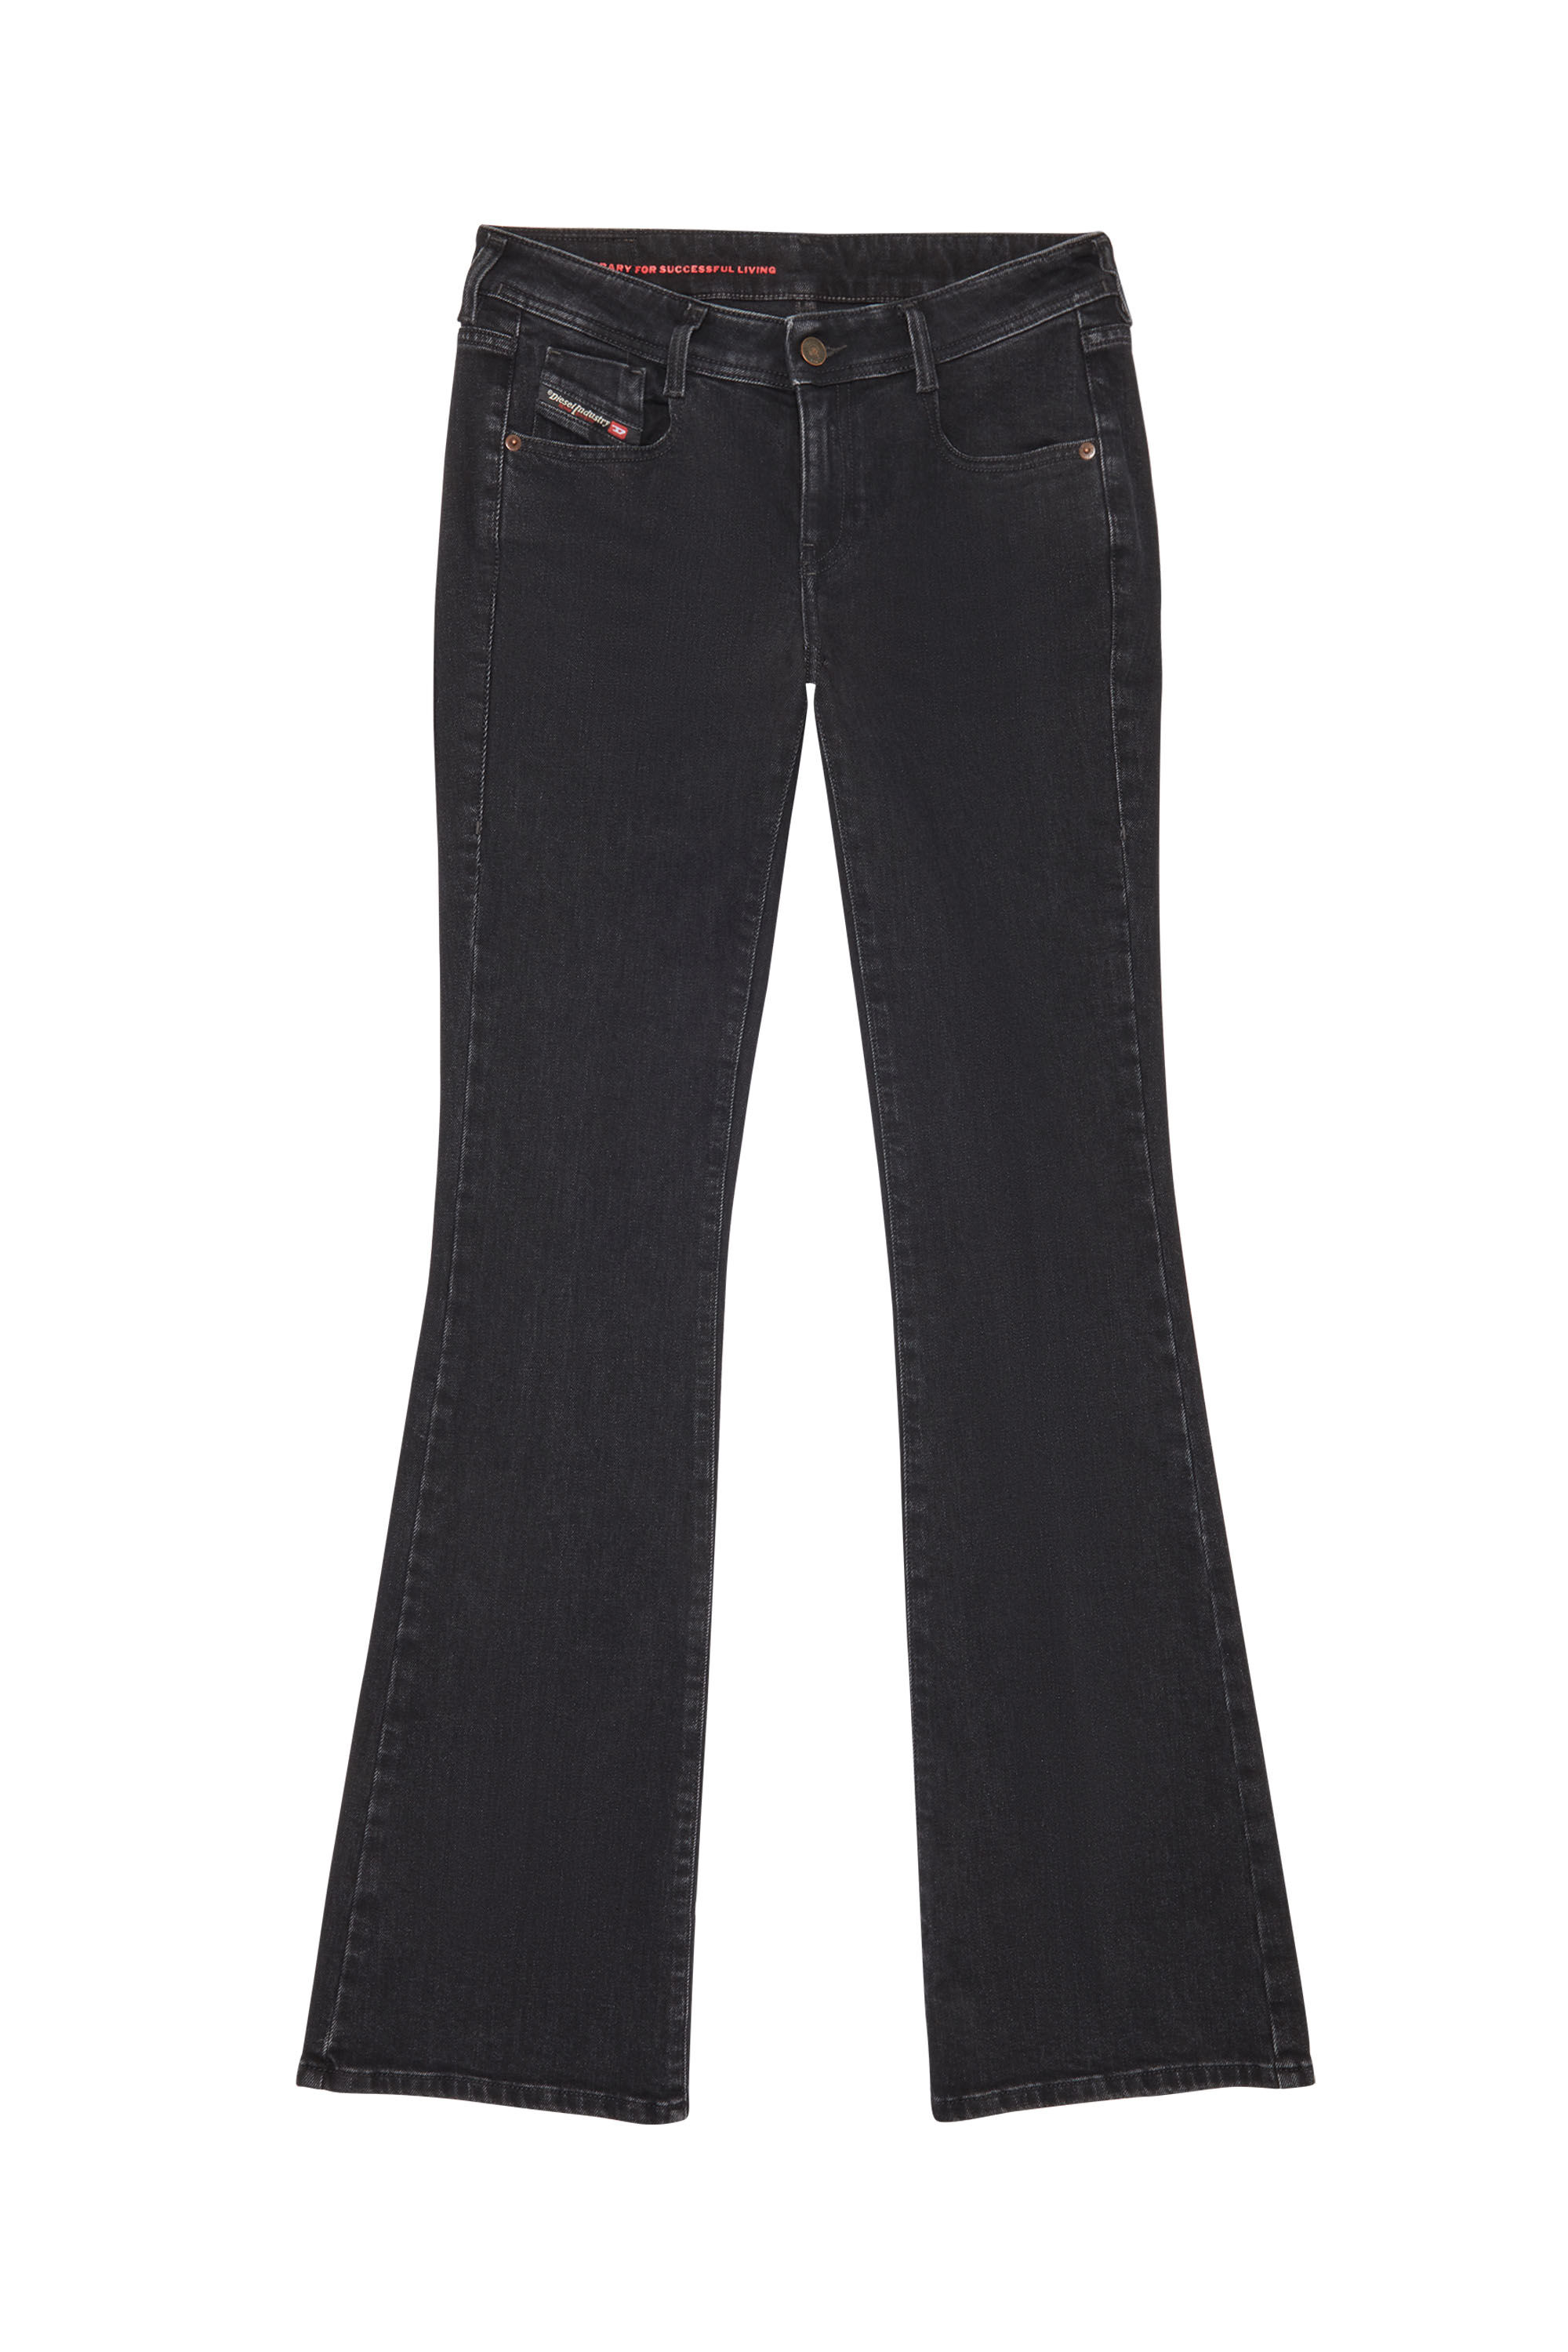 diesel.com | Bootcut And Flare Jeans 1969